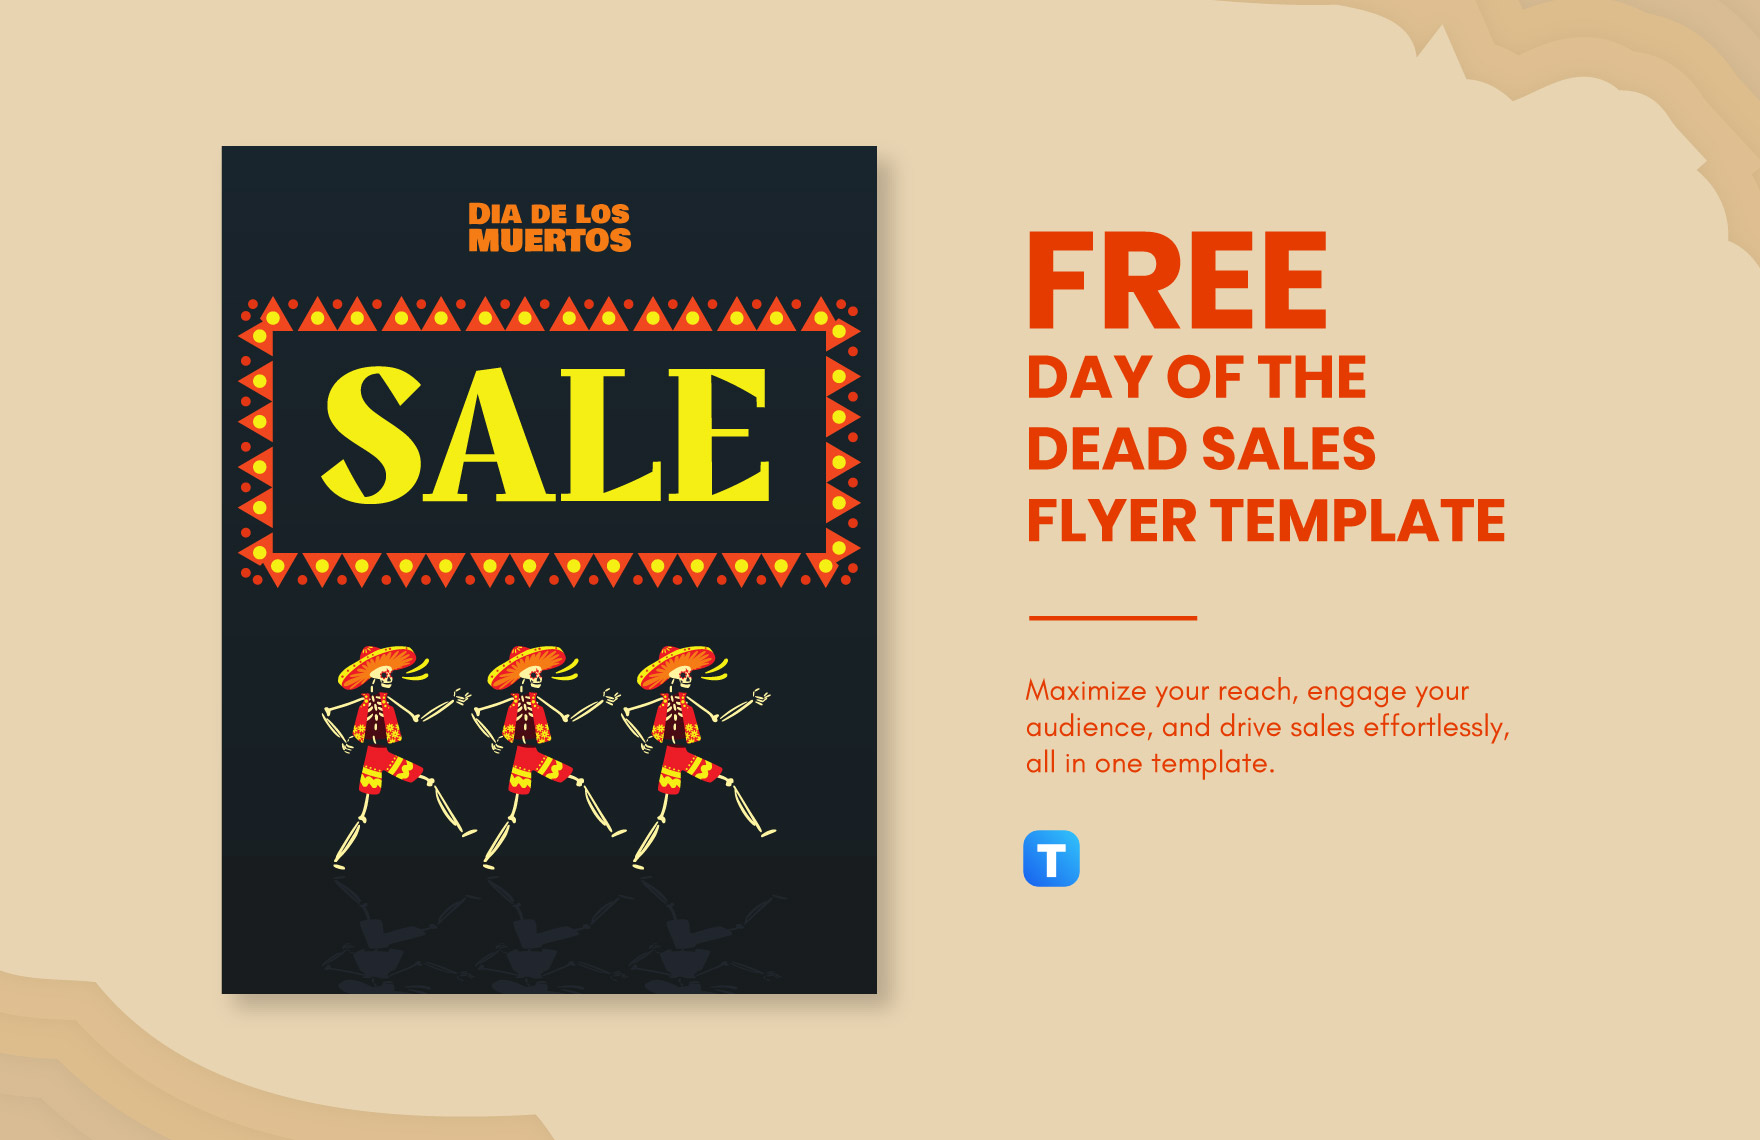 Day of the Dead Sales Flyer